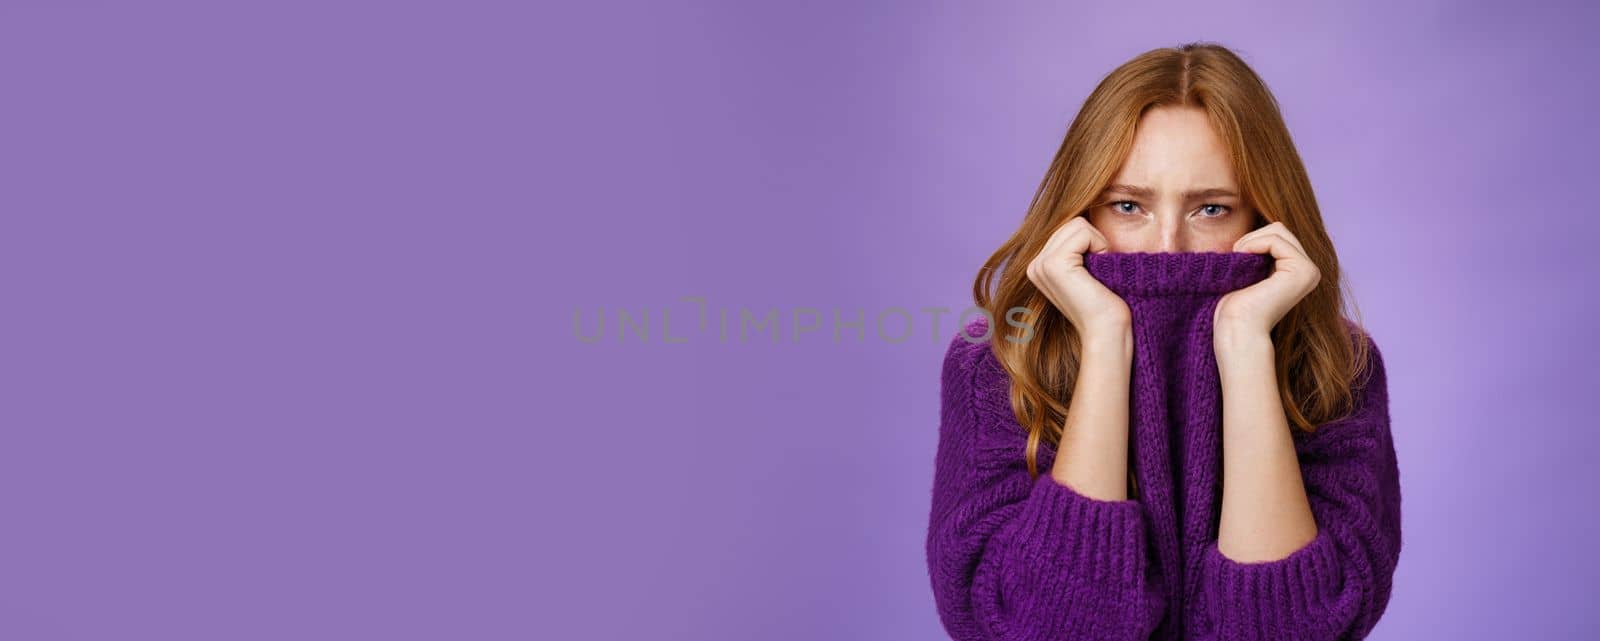 Gloomy upset redhead girlfriend pulling collar of purple sweater on nose, frowning and squinting offended, being aggrieved and resent, sulking moody and displeased over violet background.